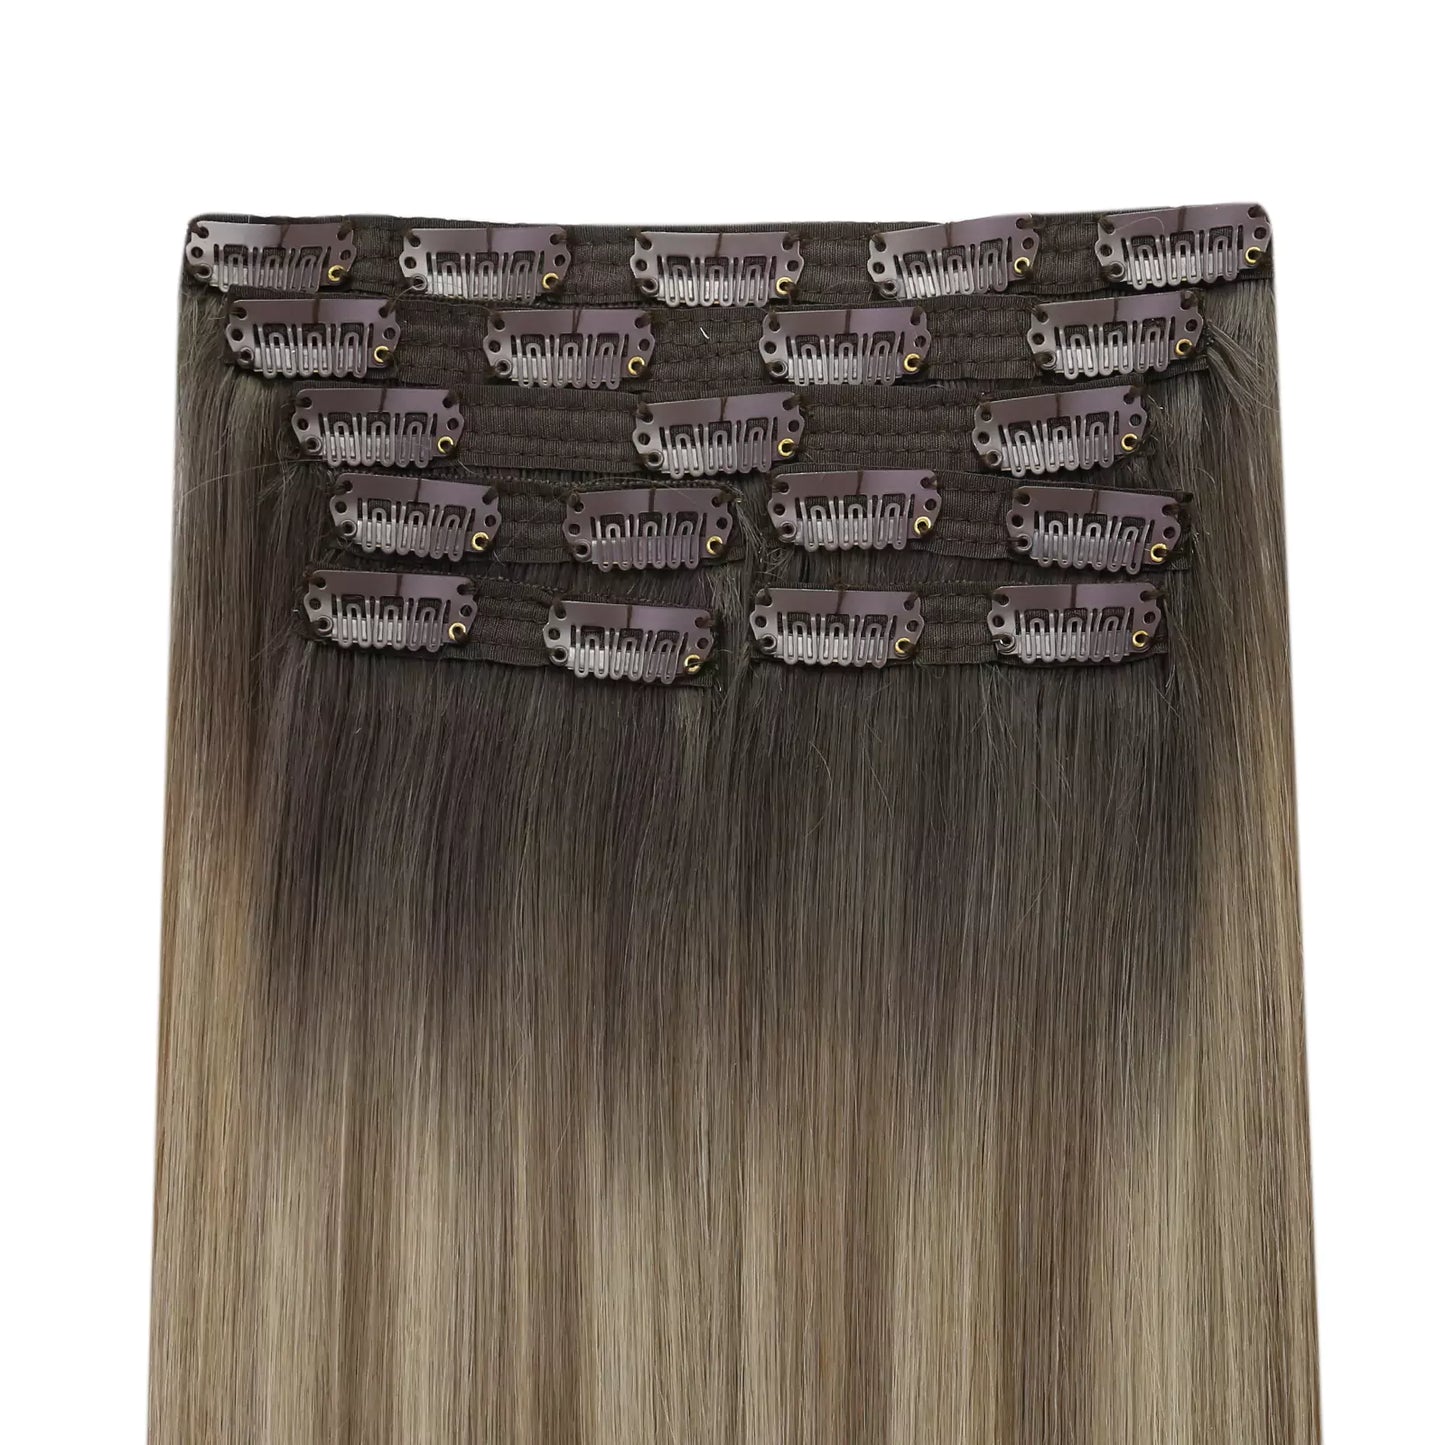 clip in virgin hair extensions wholelsa balayage color 